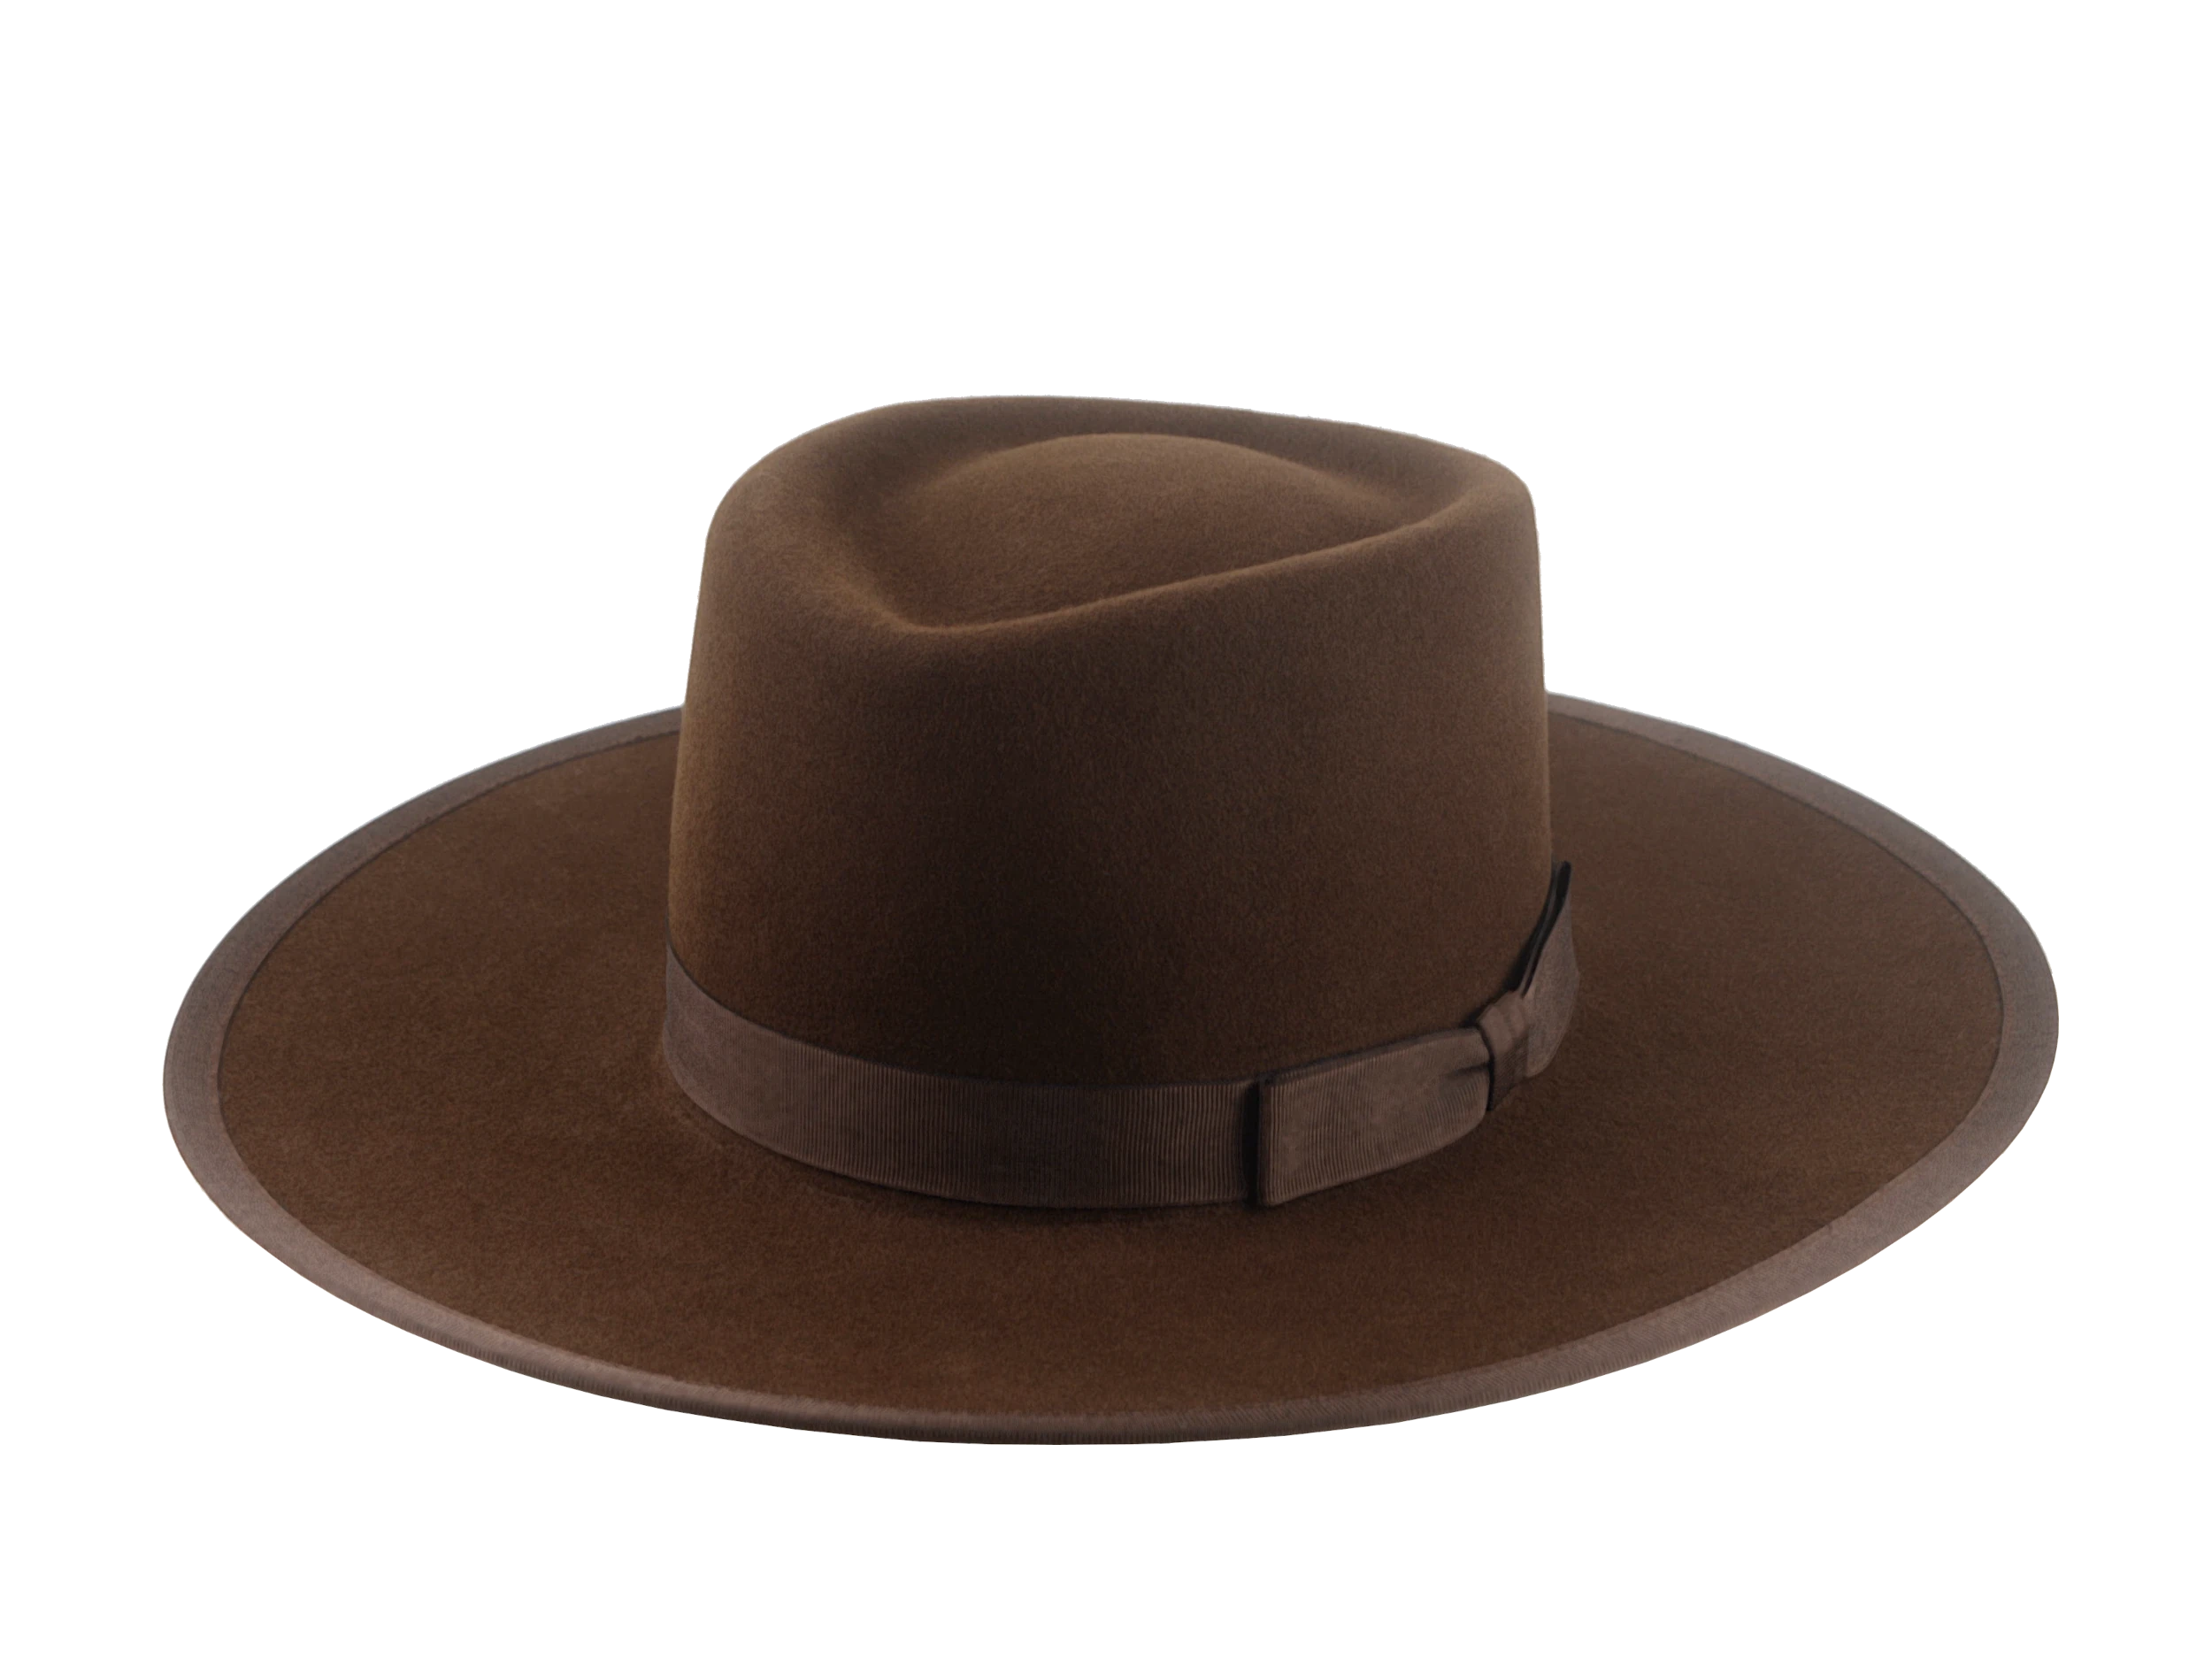 The Vanguard: Profile view emphasizing the hat’s proportions and style | Agnoulita Hats